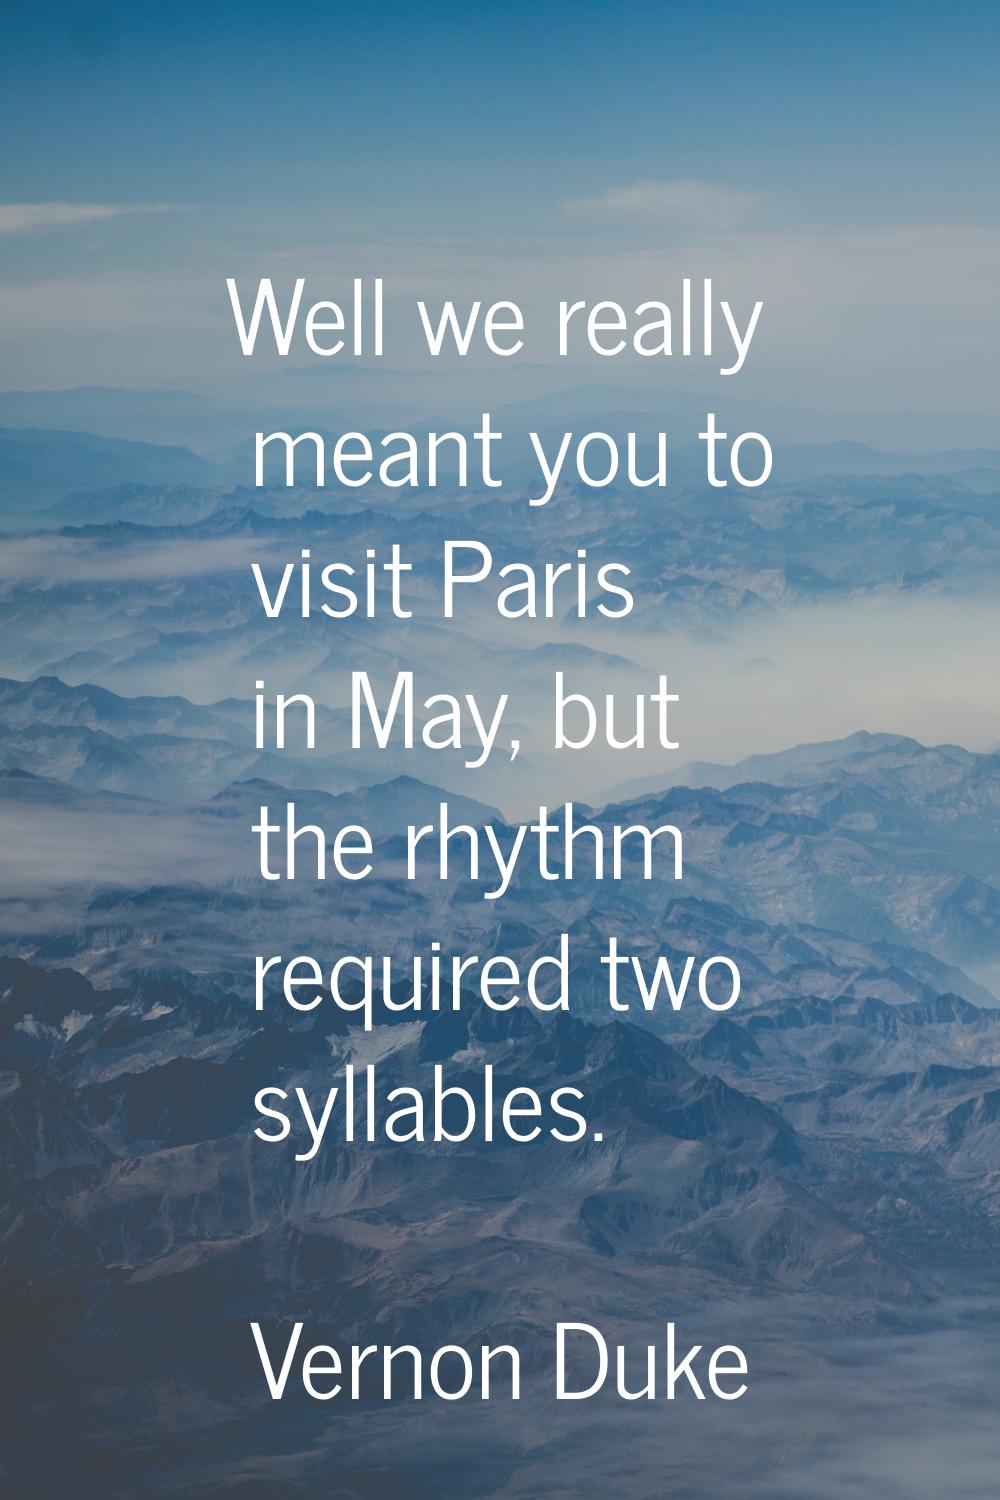 Well we really meant you to visit Paris in May, but the rhythm required two syllables.